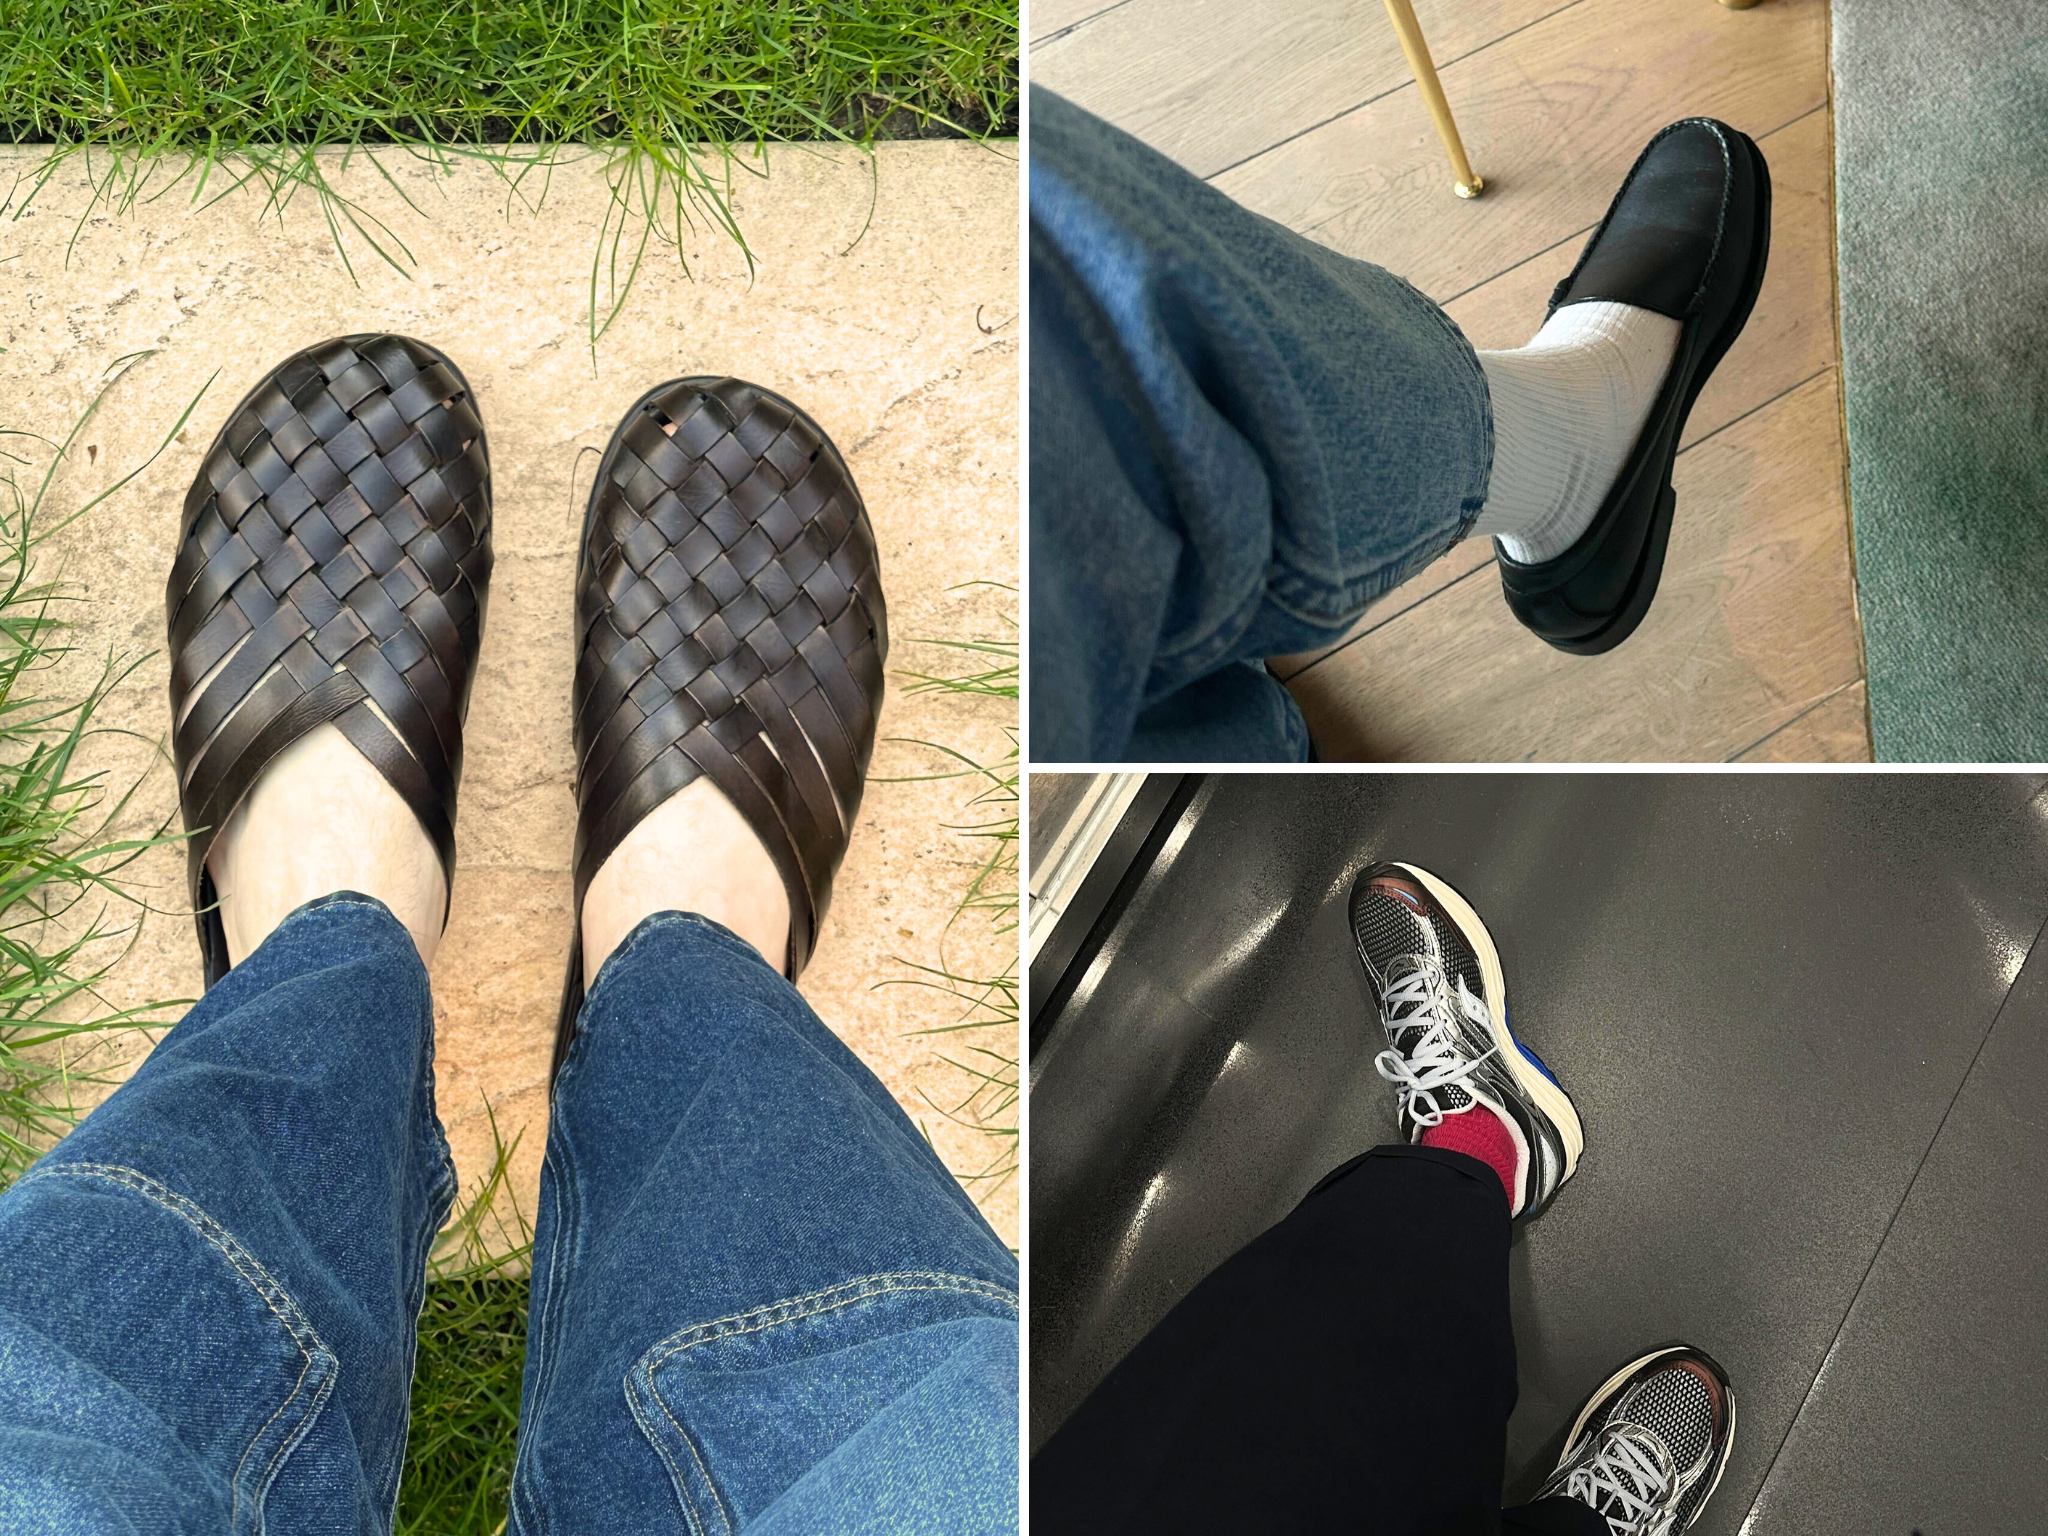 We tested these summer shoes outside, for drinks and to the office